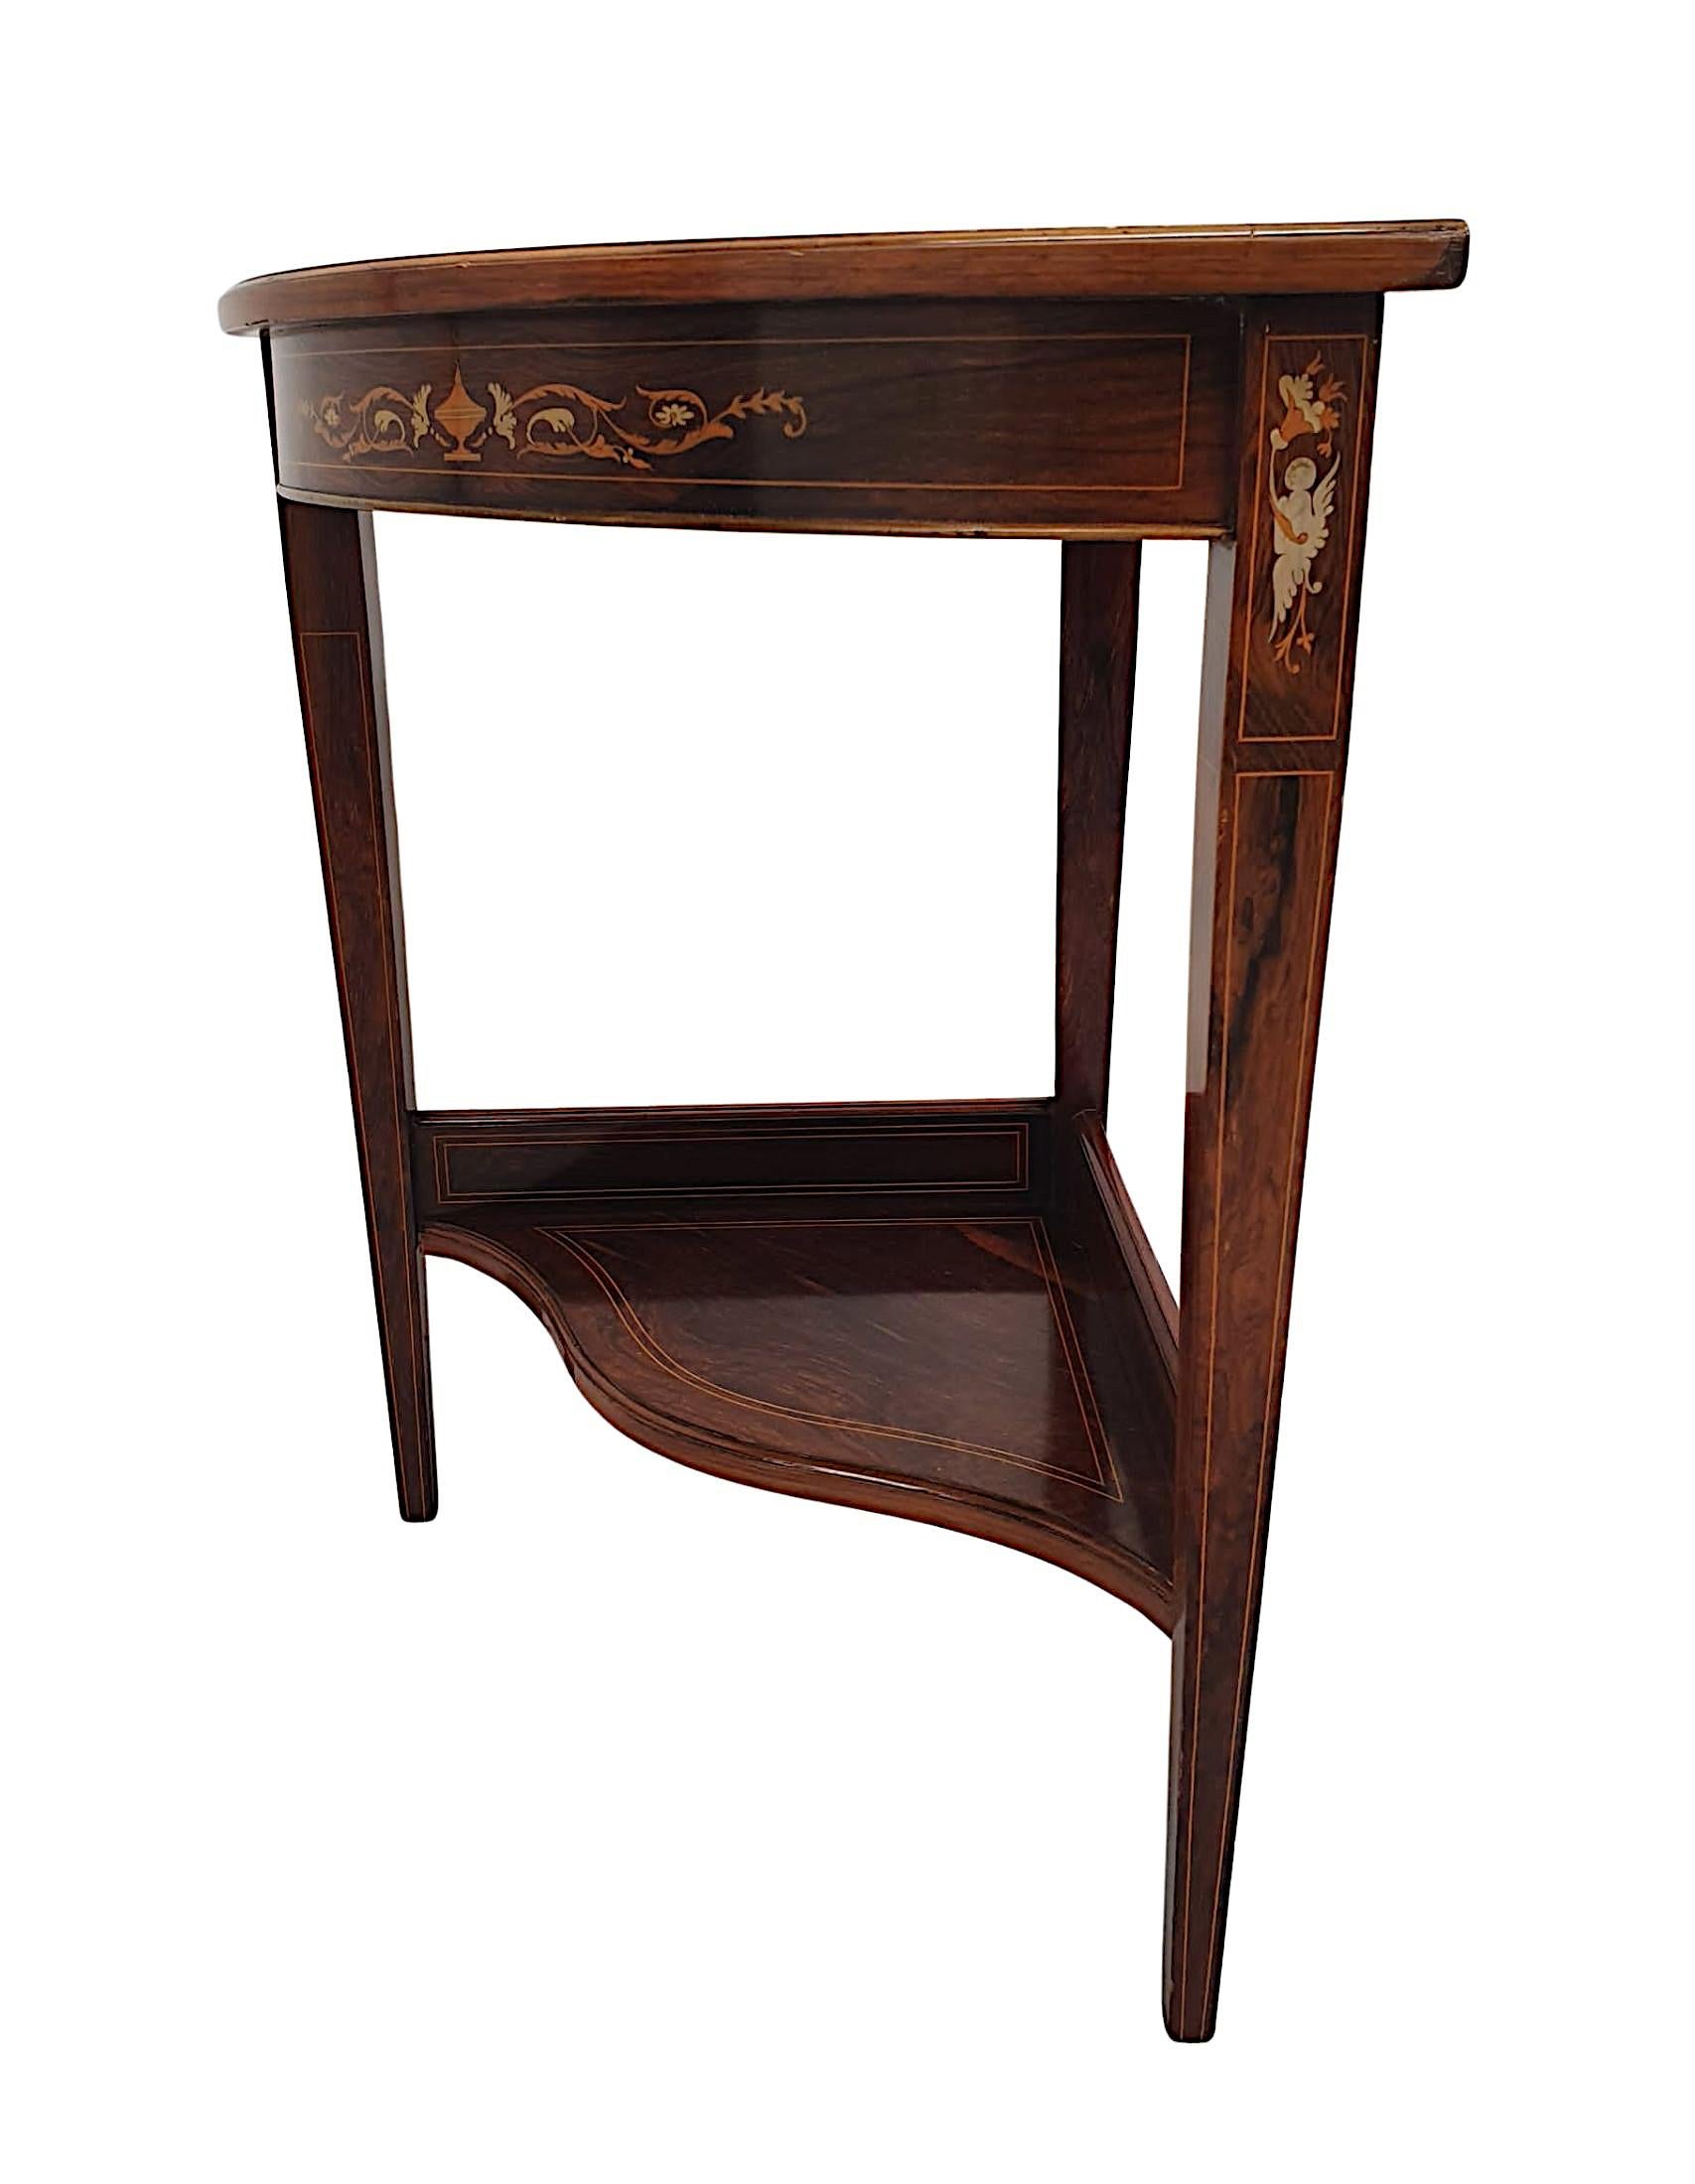 English Gorgeous Edwardian Line Inlaid Marquetry Corner Table For Sale